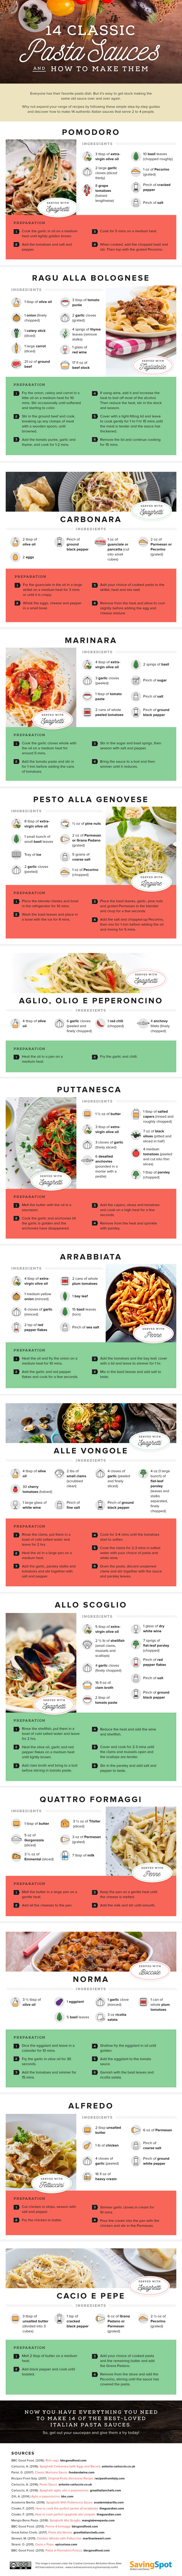 Classic Pasta Sauces and how to make them [Infographic] | ecogreenlove